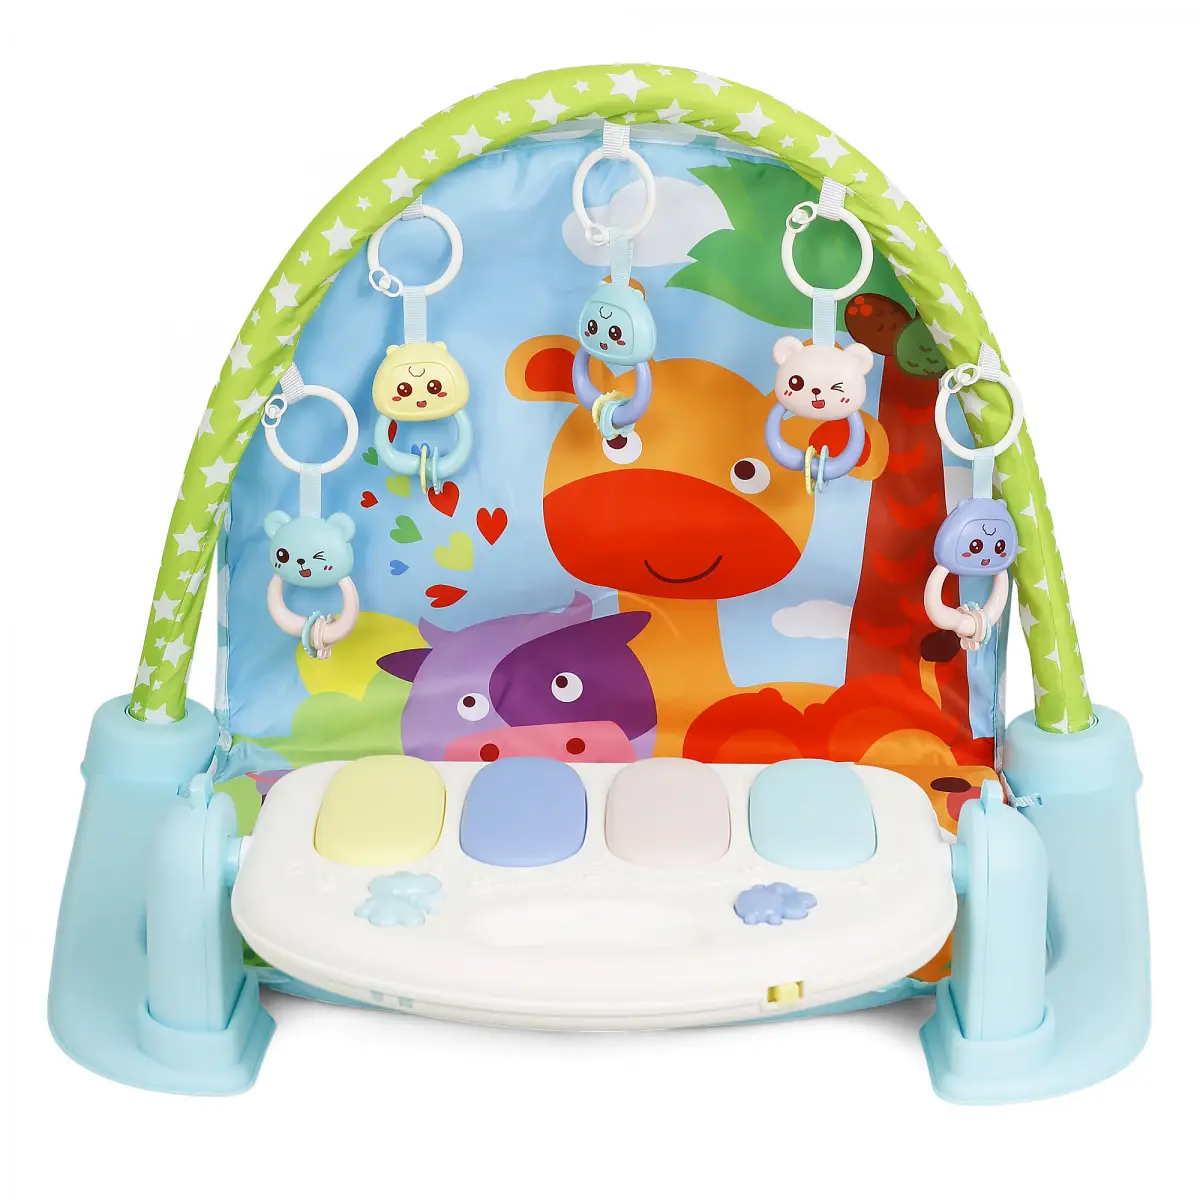 Shooting Star Baby Play Mat Gym & Fitness Rack, 6M+, Multicolour